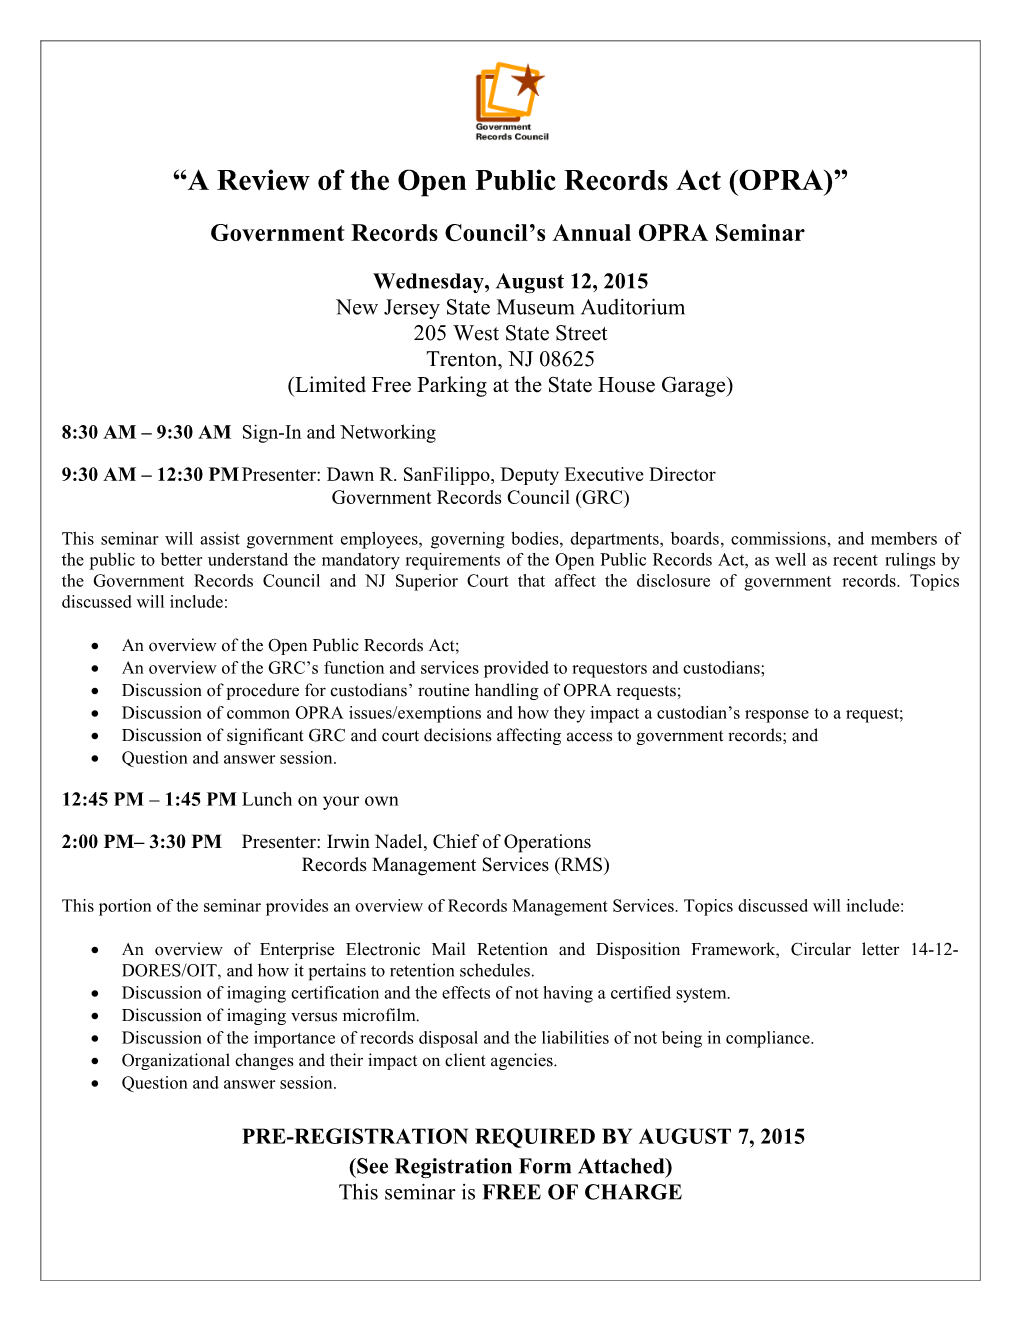 A Review of the Open Public Records Act (OPRA)